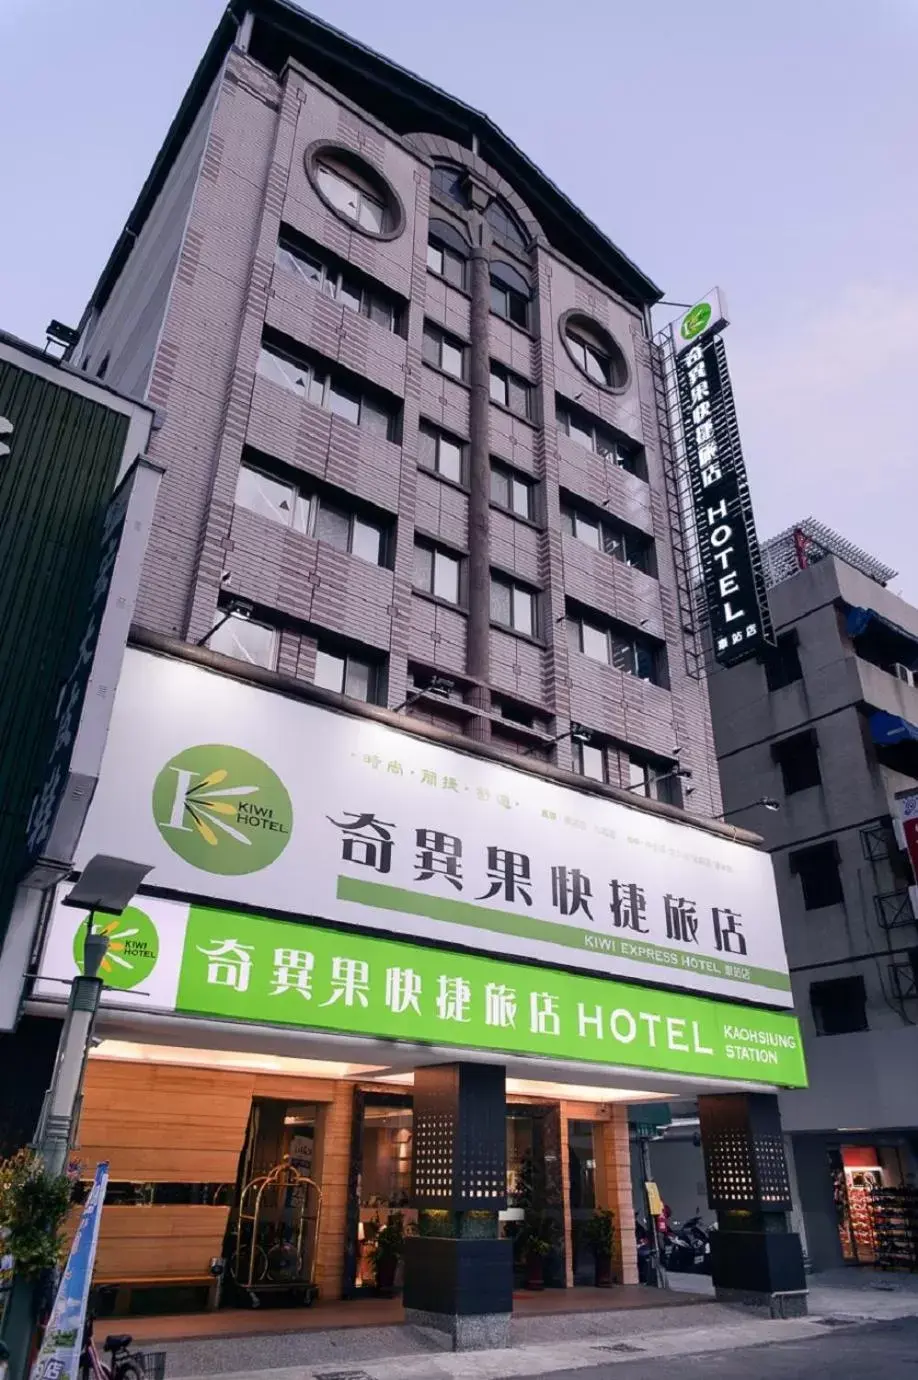 Property Building in Kiwi Express Hotel - Kaohsiung Station